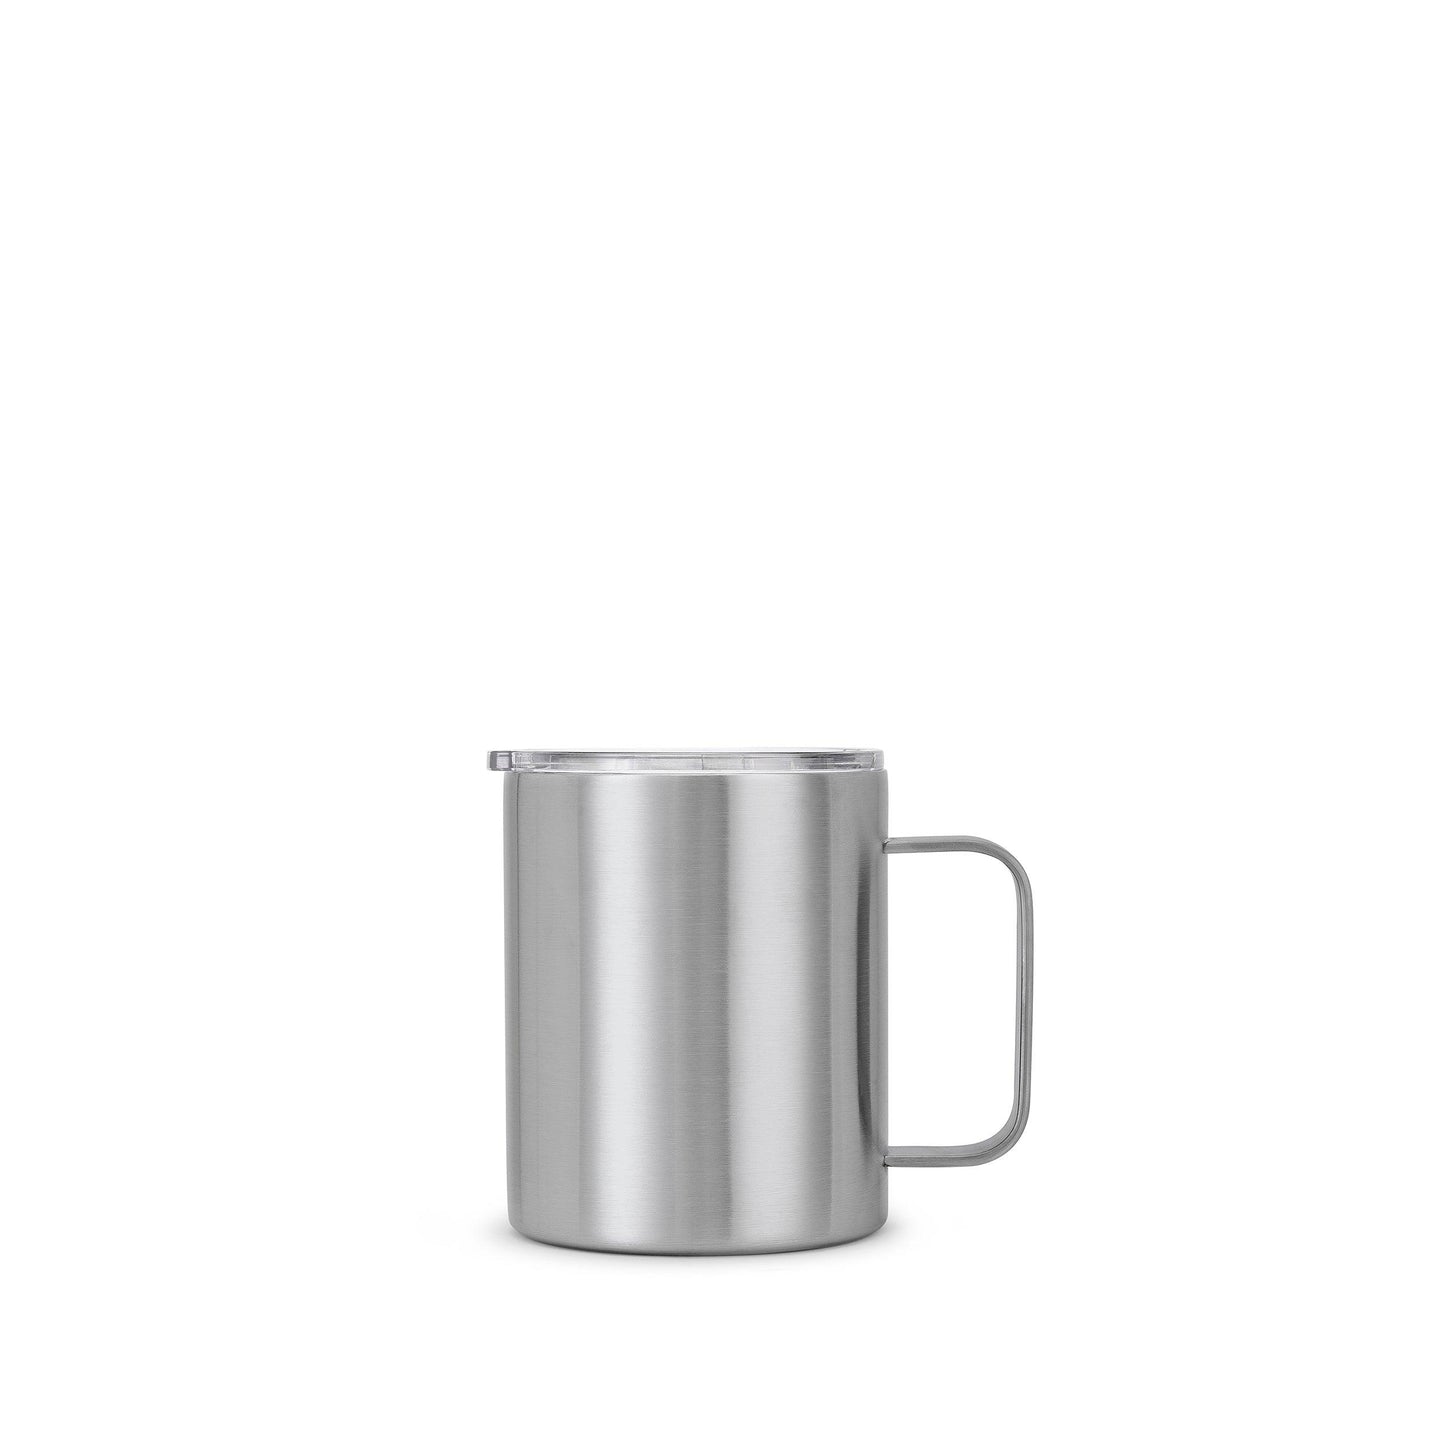 SANTECO Stainless Steel Mug For Camping Coffee Cup With Lid and